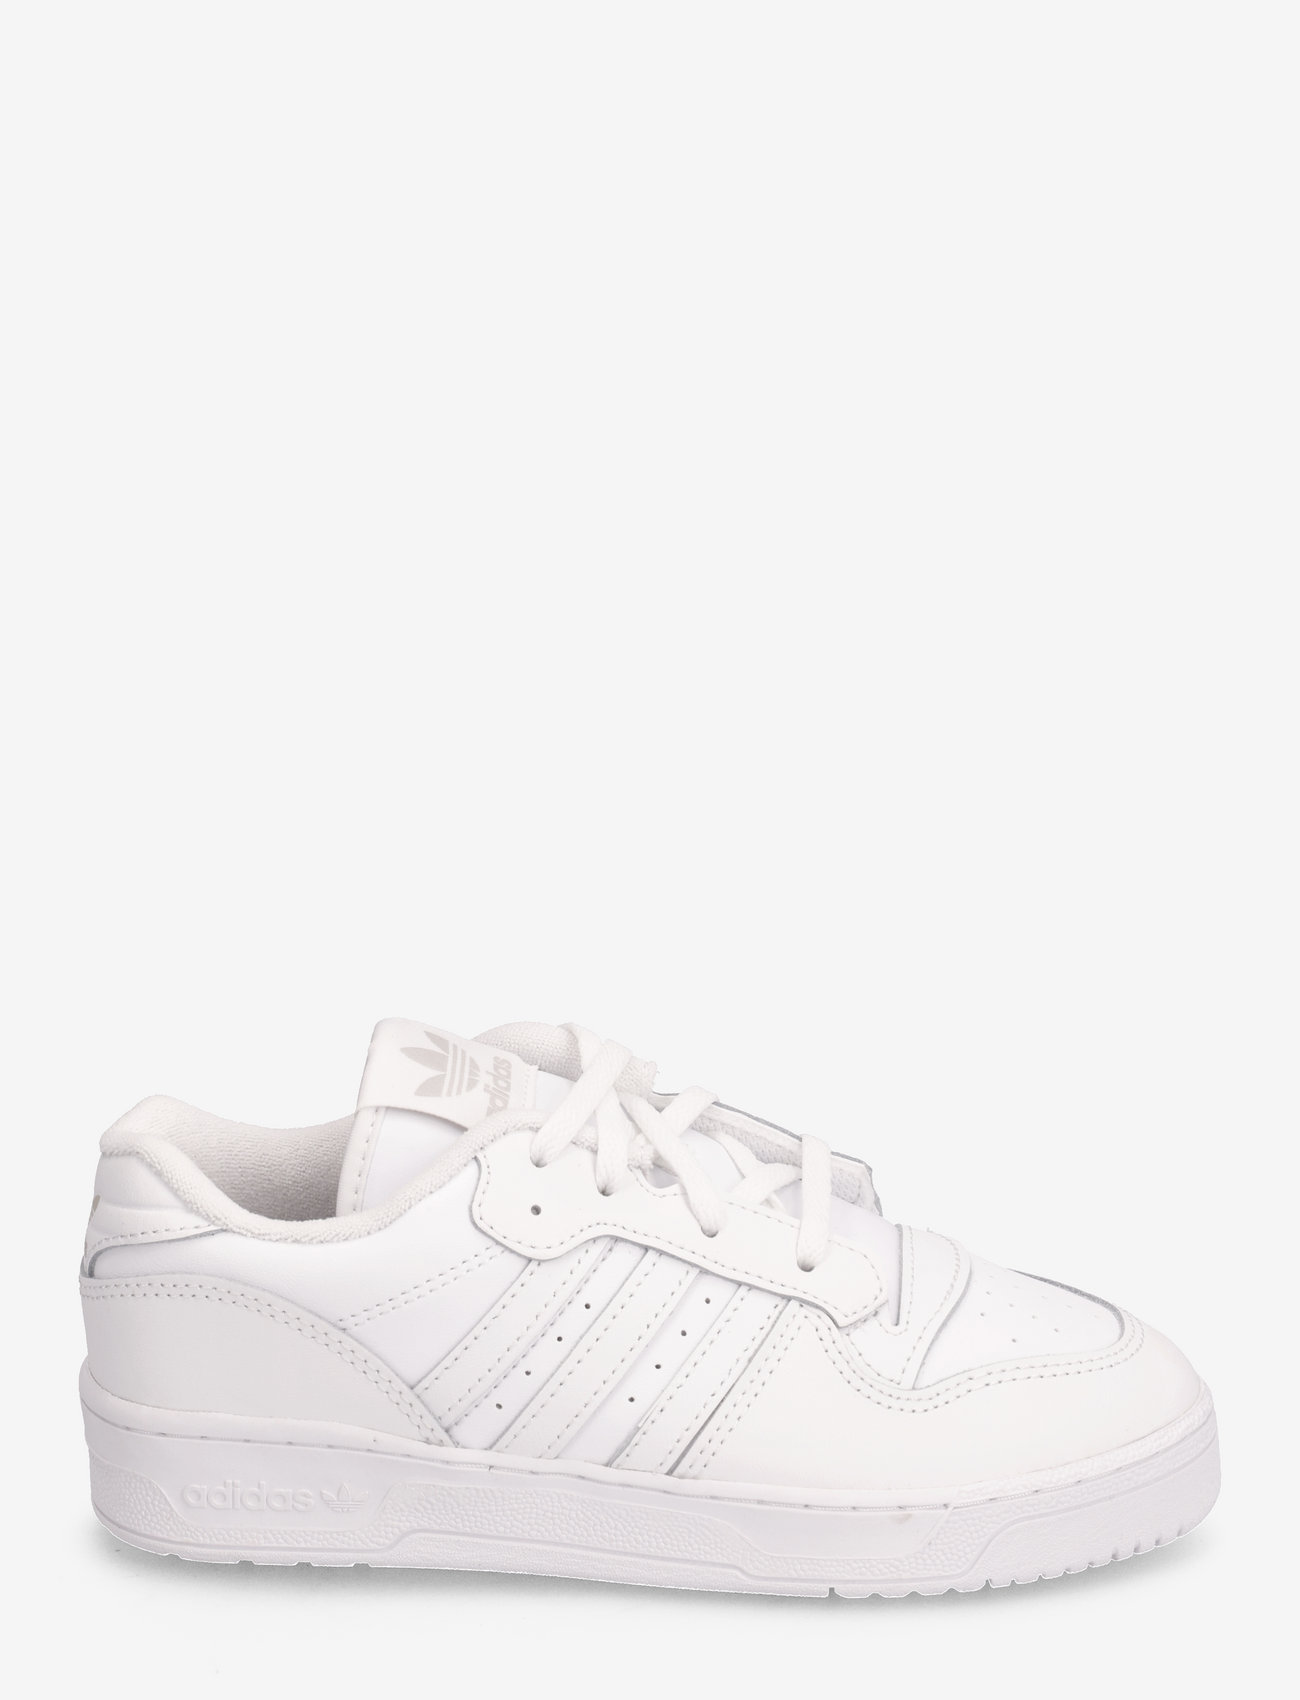 adidas Originals - RIVALRY LOW C - sommarfynd - ftwwht/ftwwht/greone - 1